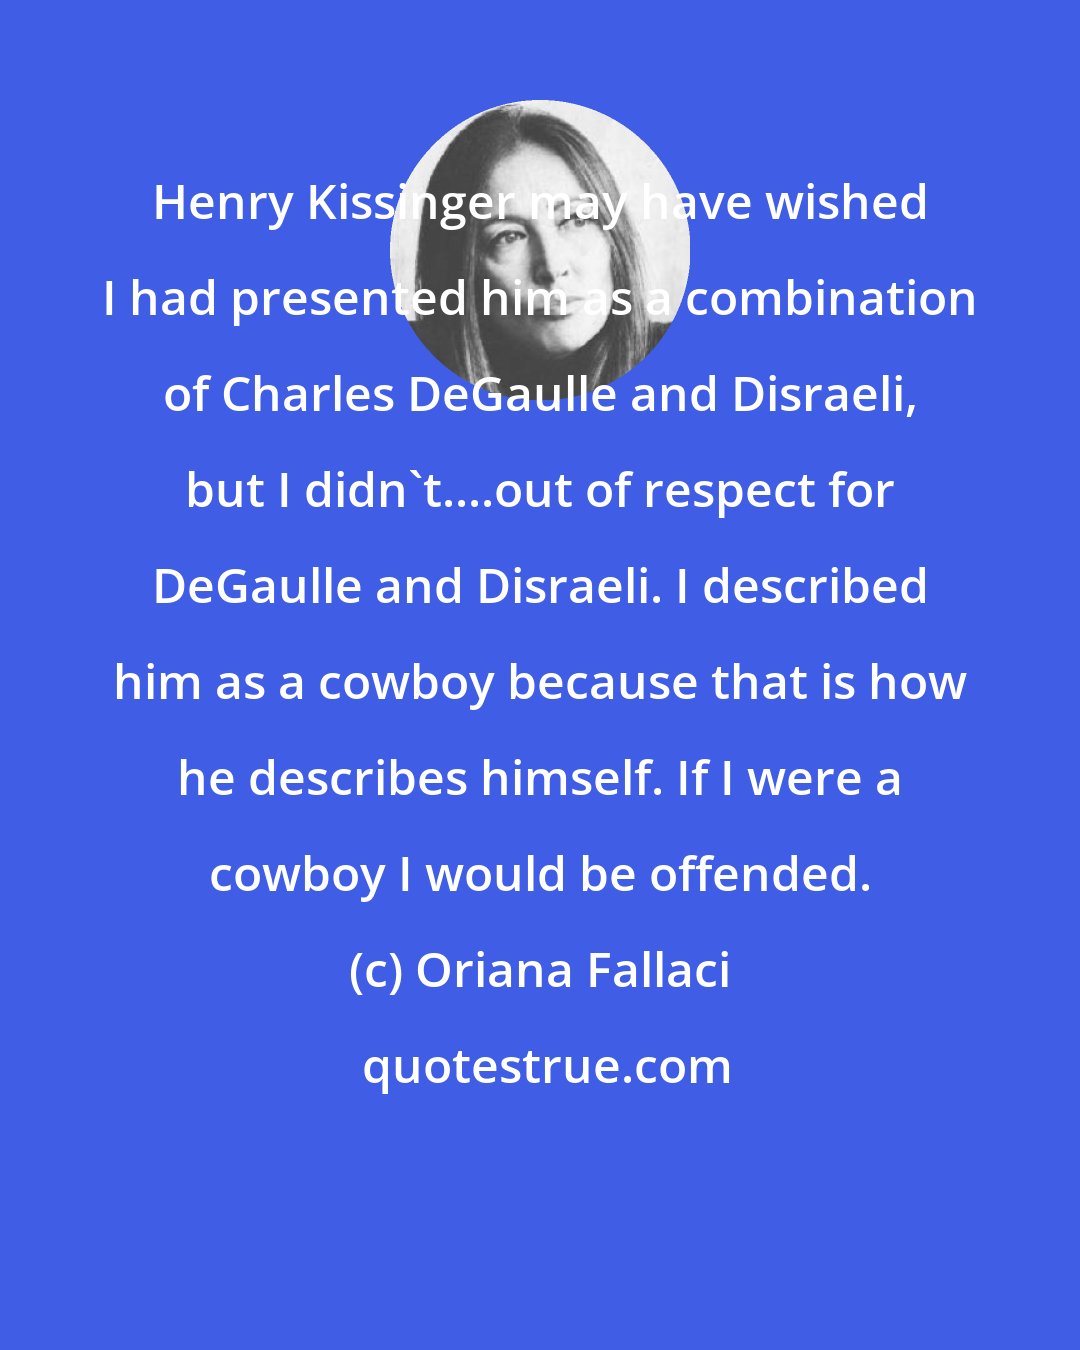 Oriana Fallaci: Henry Kissinger may have wished I had presented him as a combination of Charles DeGaulle and Disraeli, but I didn't....out of respect for DeGaulle and Disraeli. I described him as a cowboy because that is how he describes himself. If I were a cowboy I would be offended.